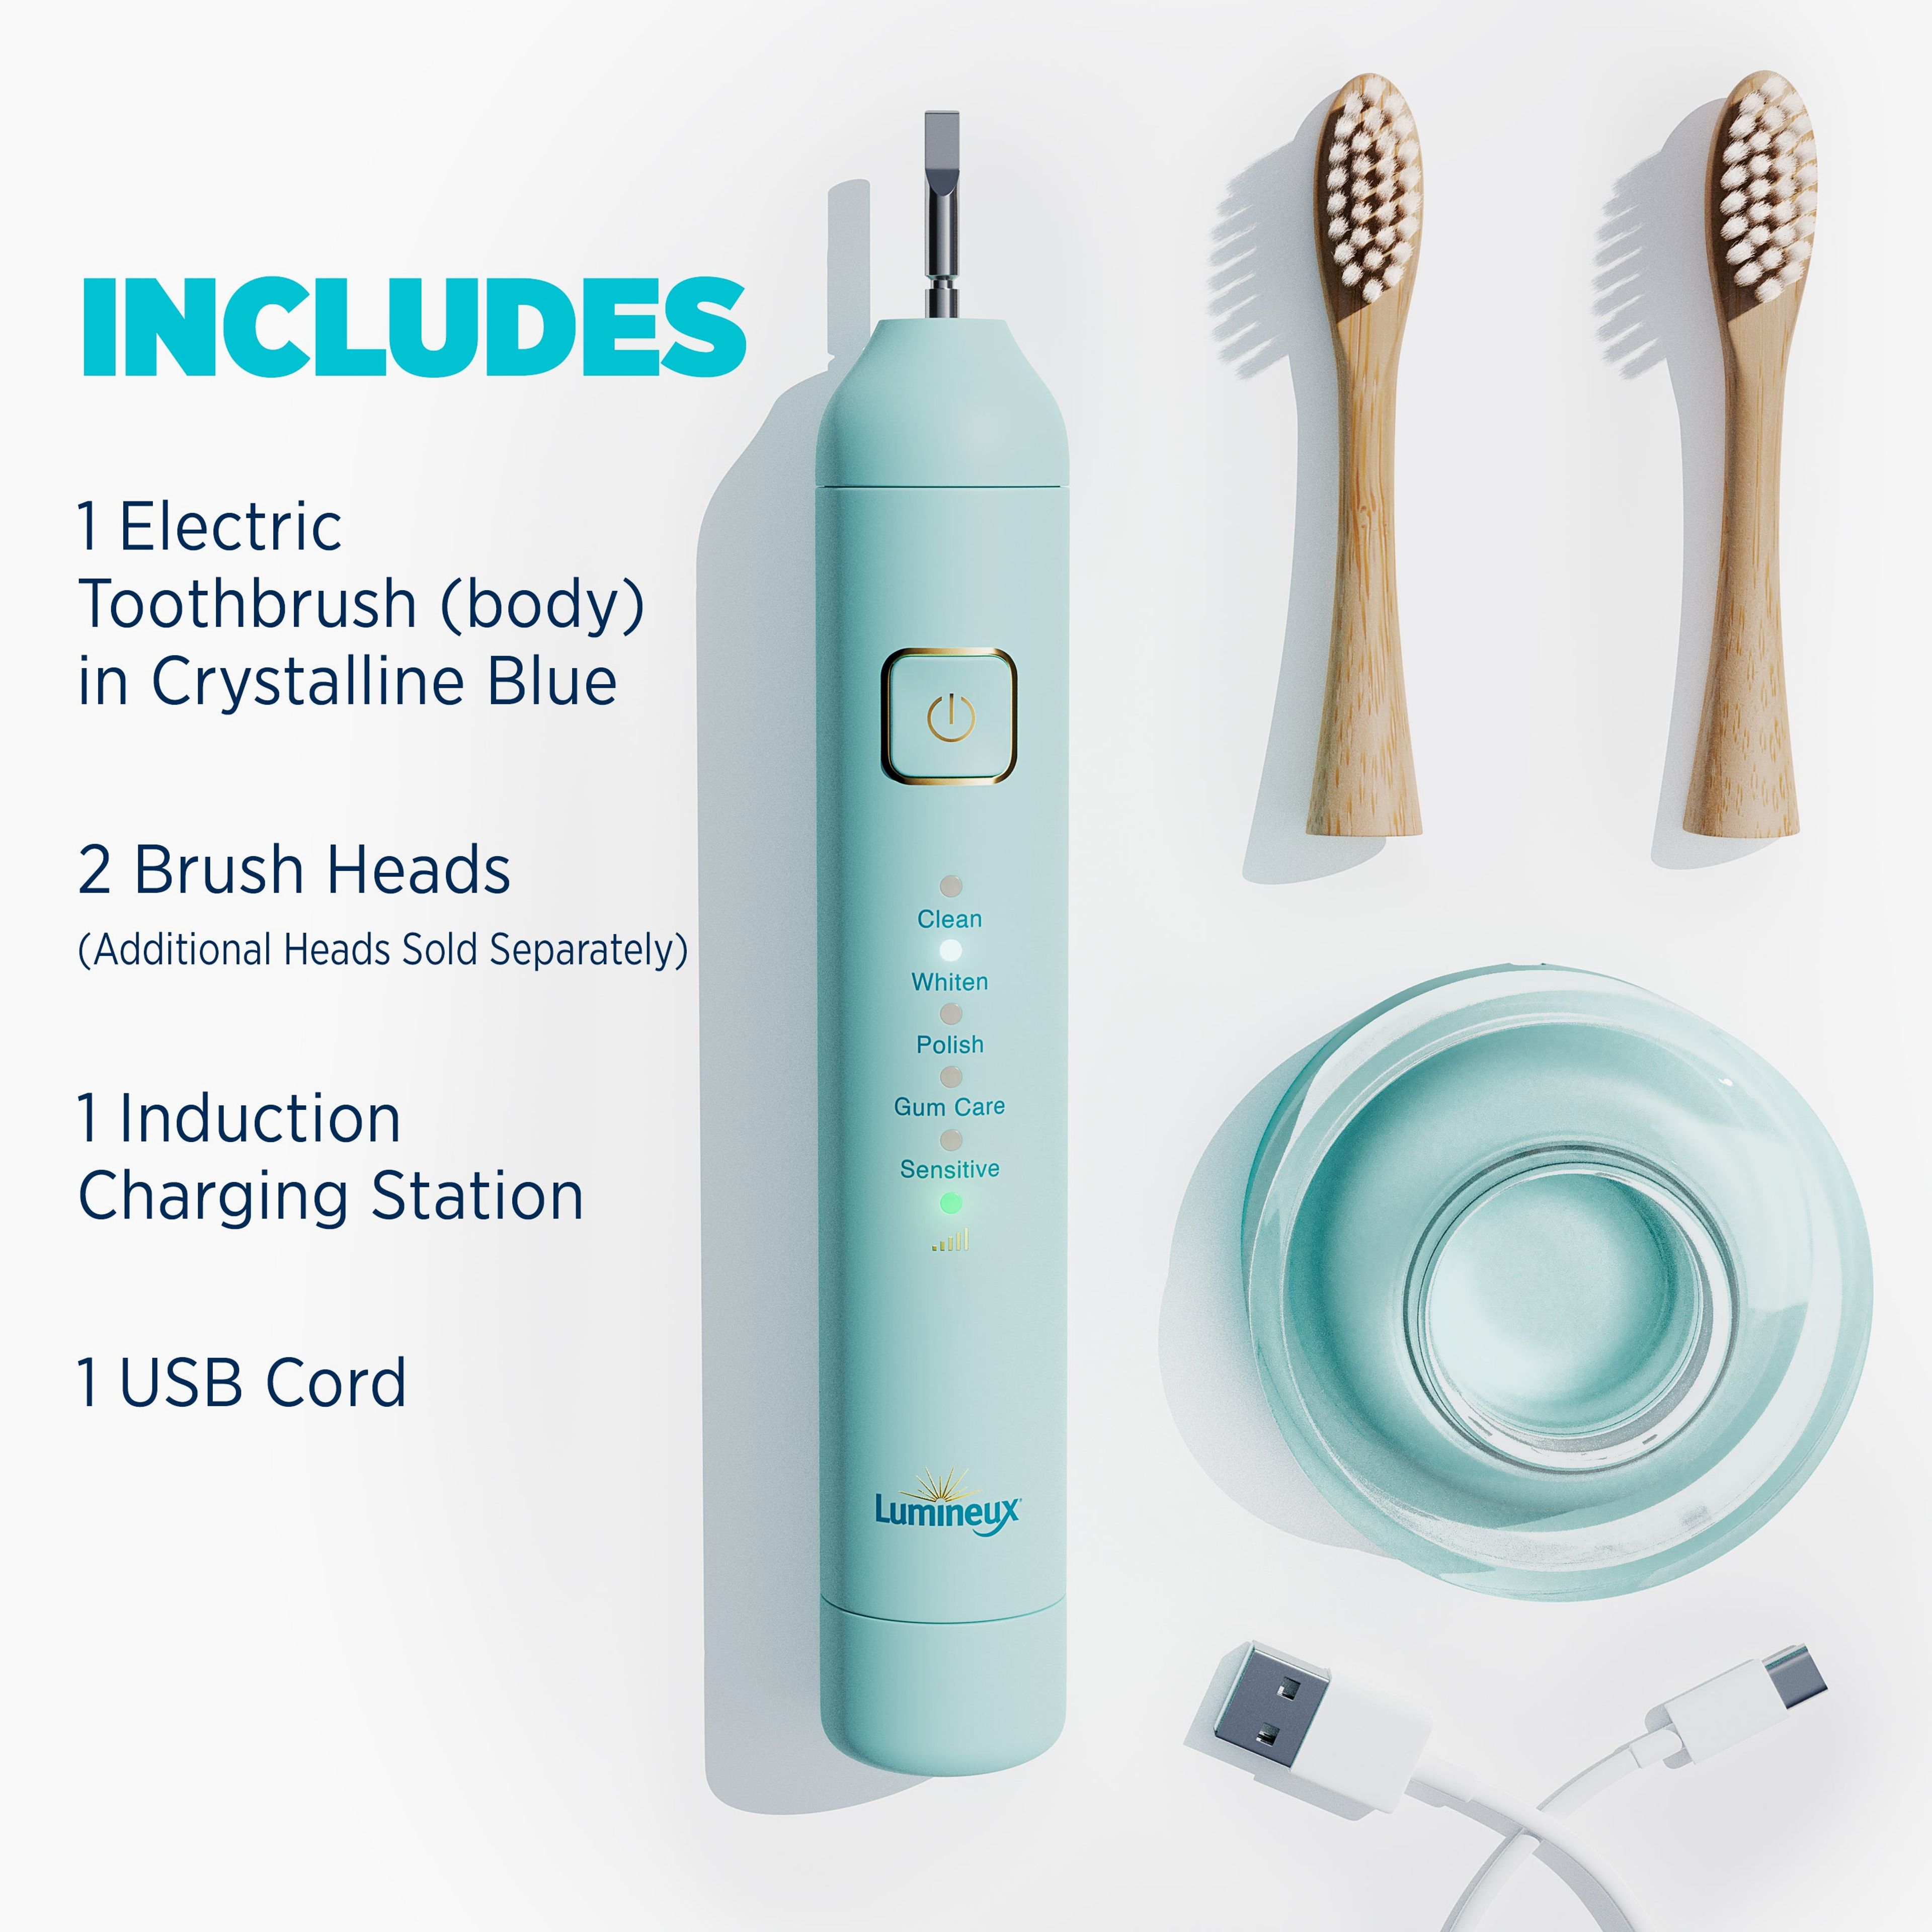 Lumineux Sonic Electric Toothbrush (Crystalline)